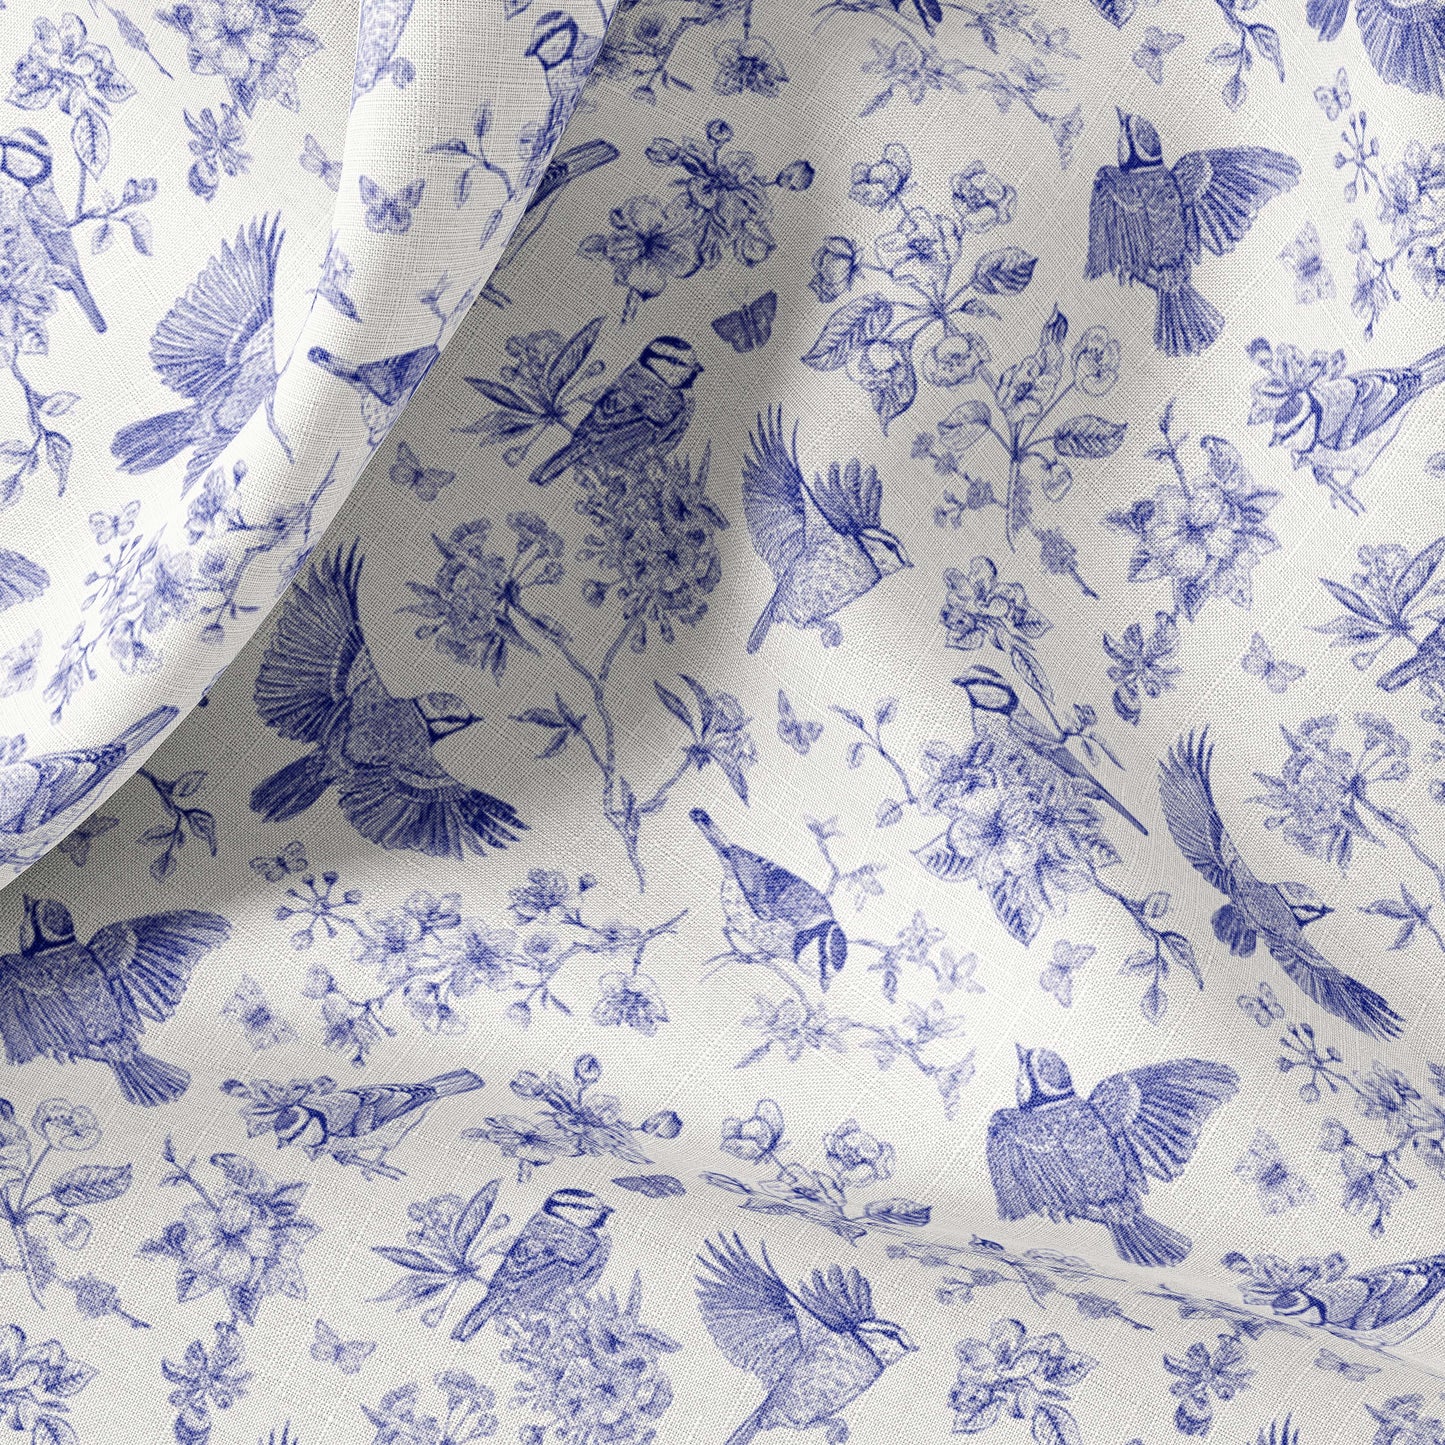 Vintage Linen By The Yard French Toile de Jouy Print Linen Fabric For Bedding, Curtains, Dresses, Clothing, Table Cloth & Pillow Covers